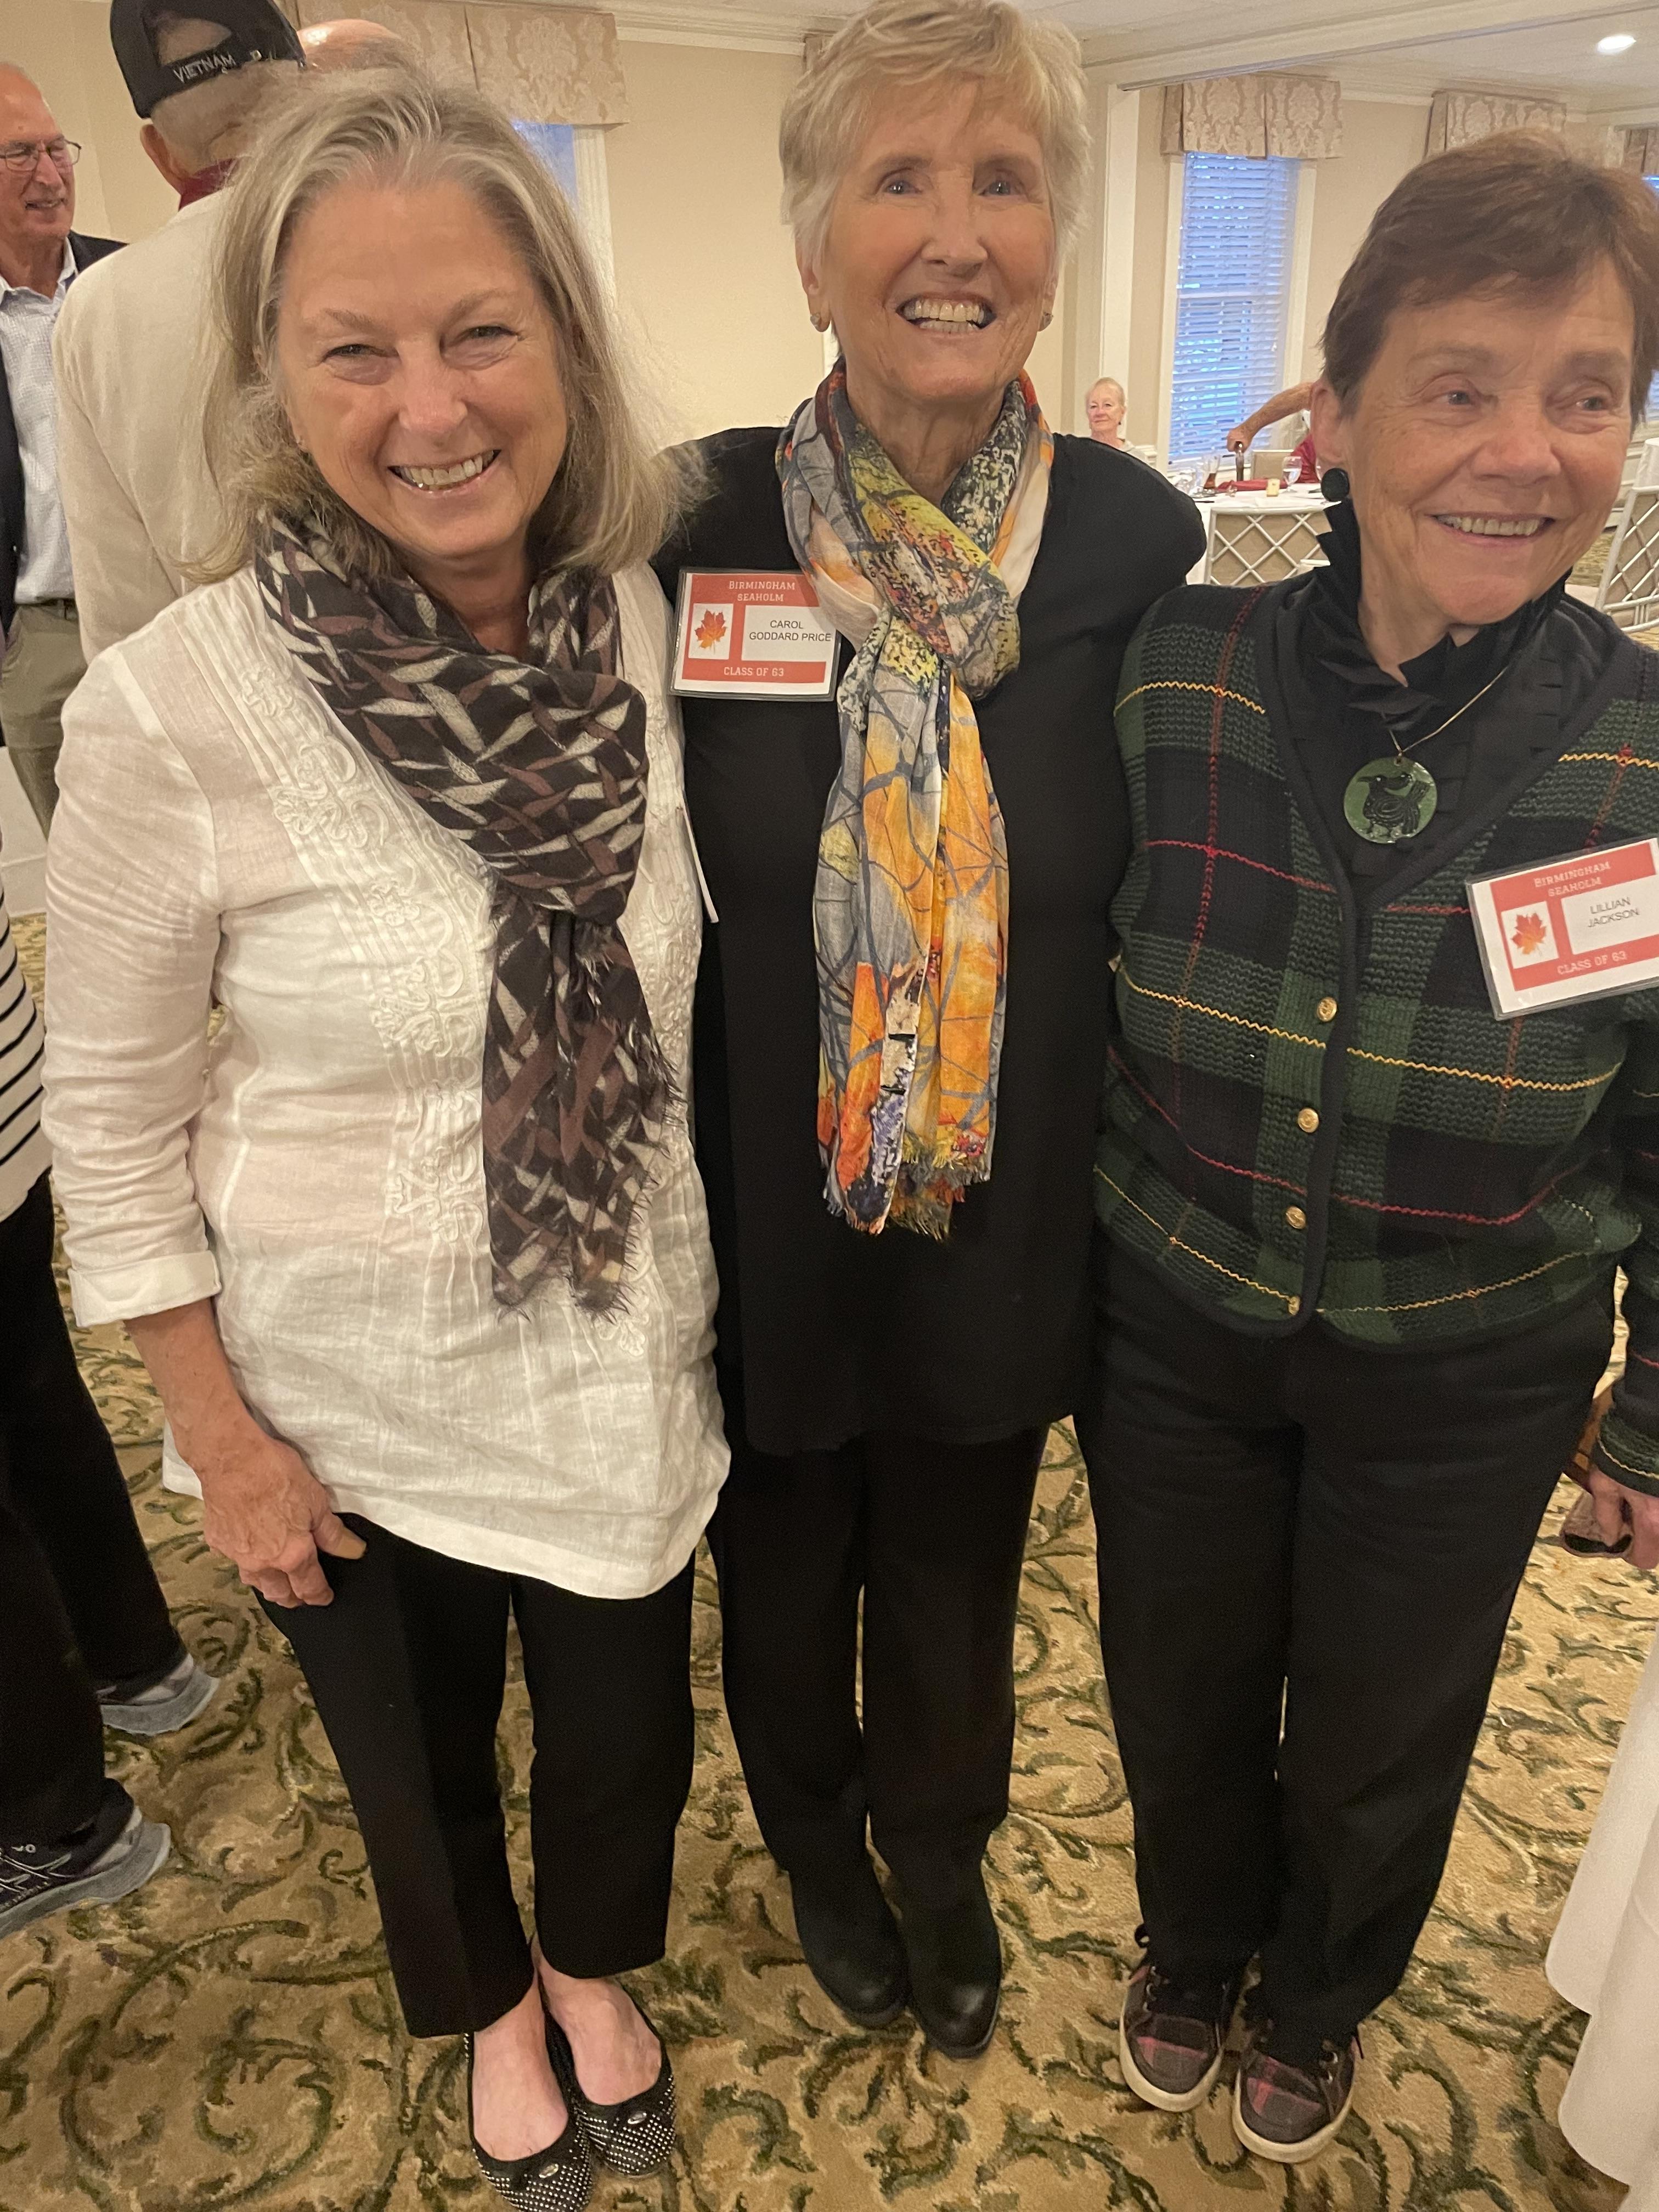 JUDY DITTRICH WITBECK, CAROL GODDARD PRICE AND LILLIAN JACKSON